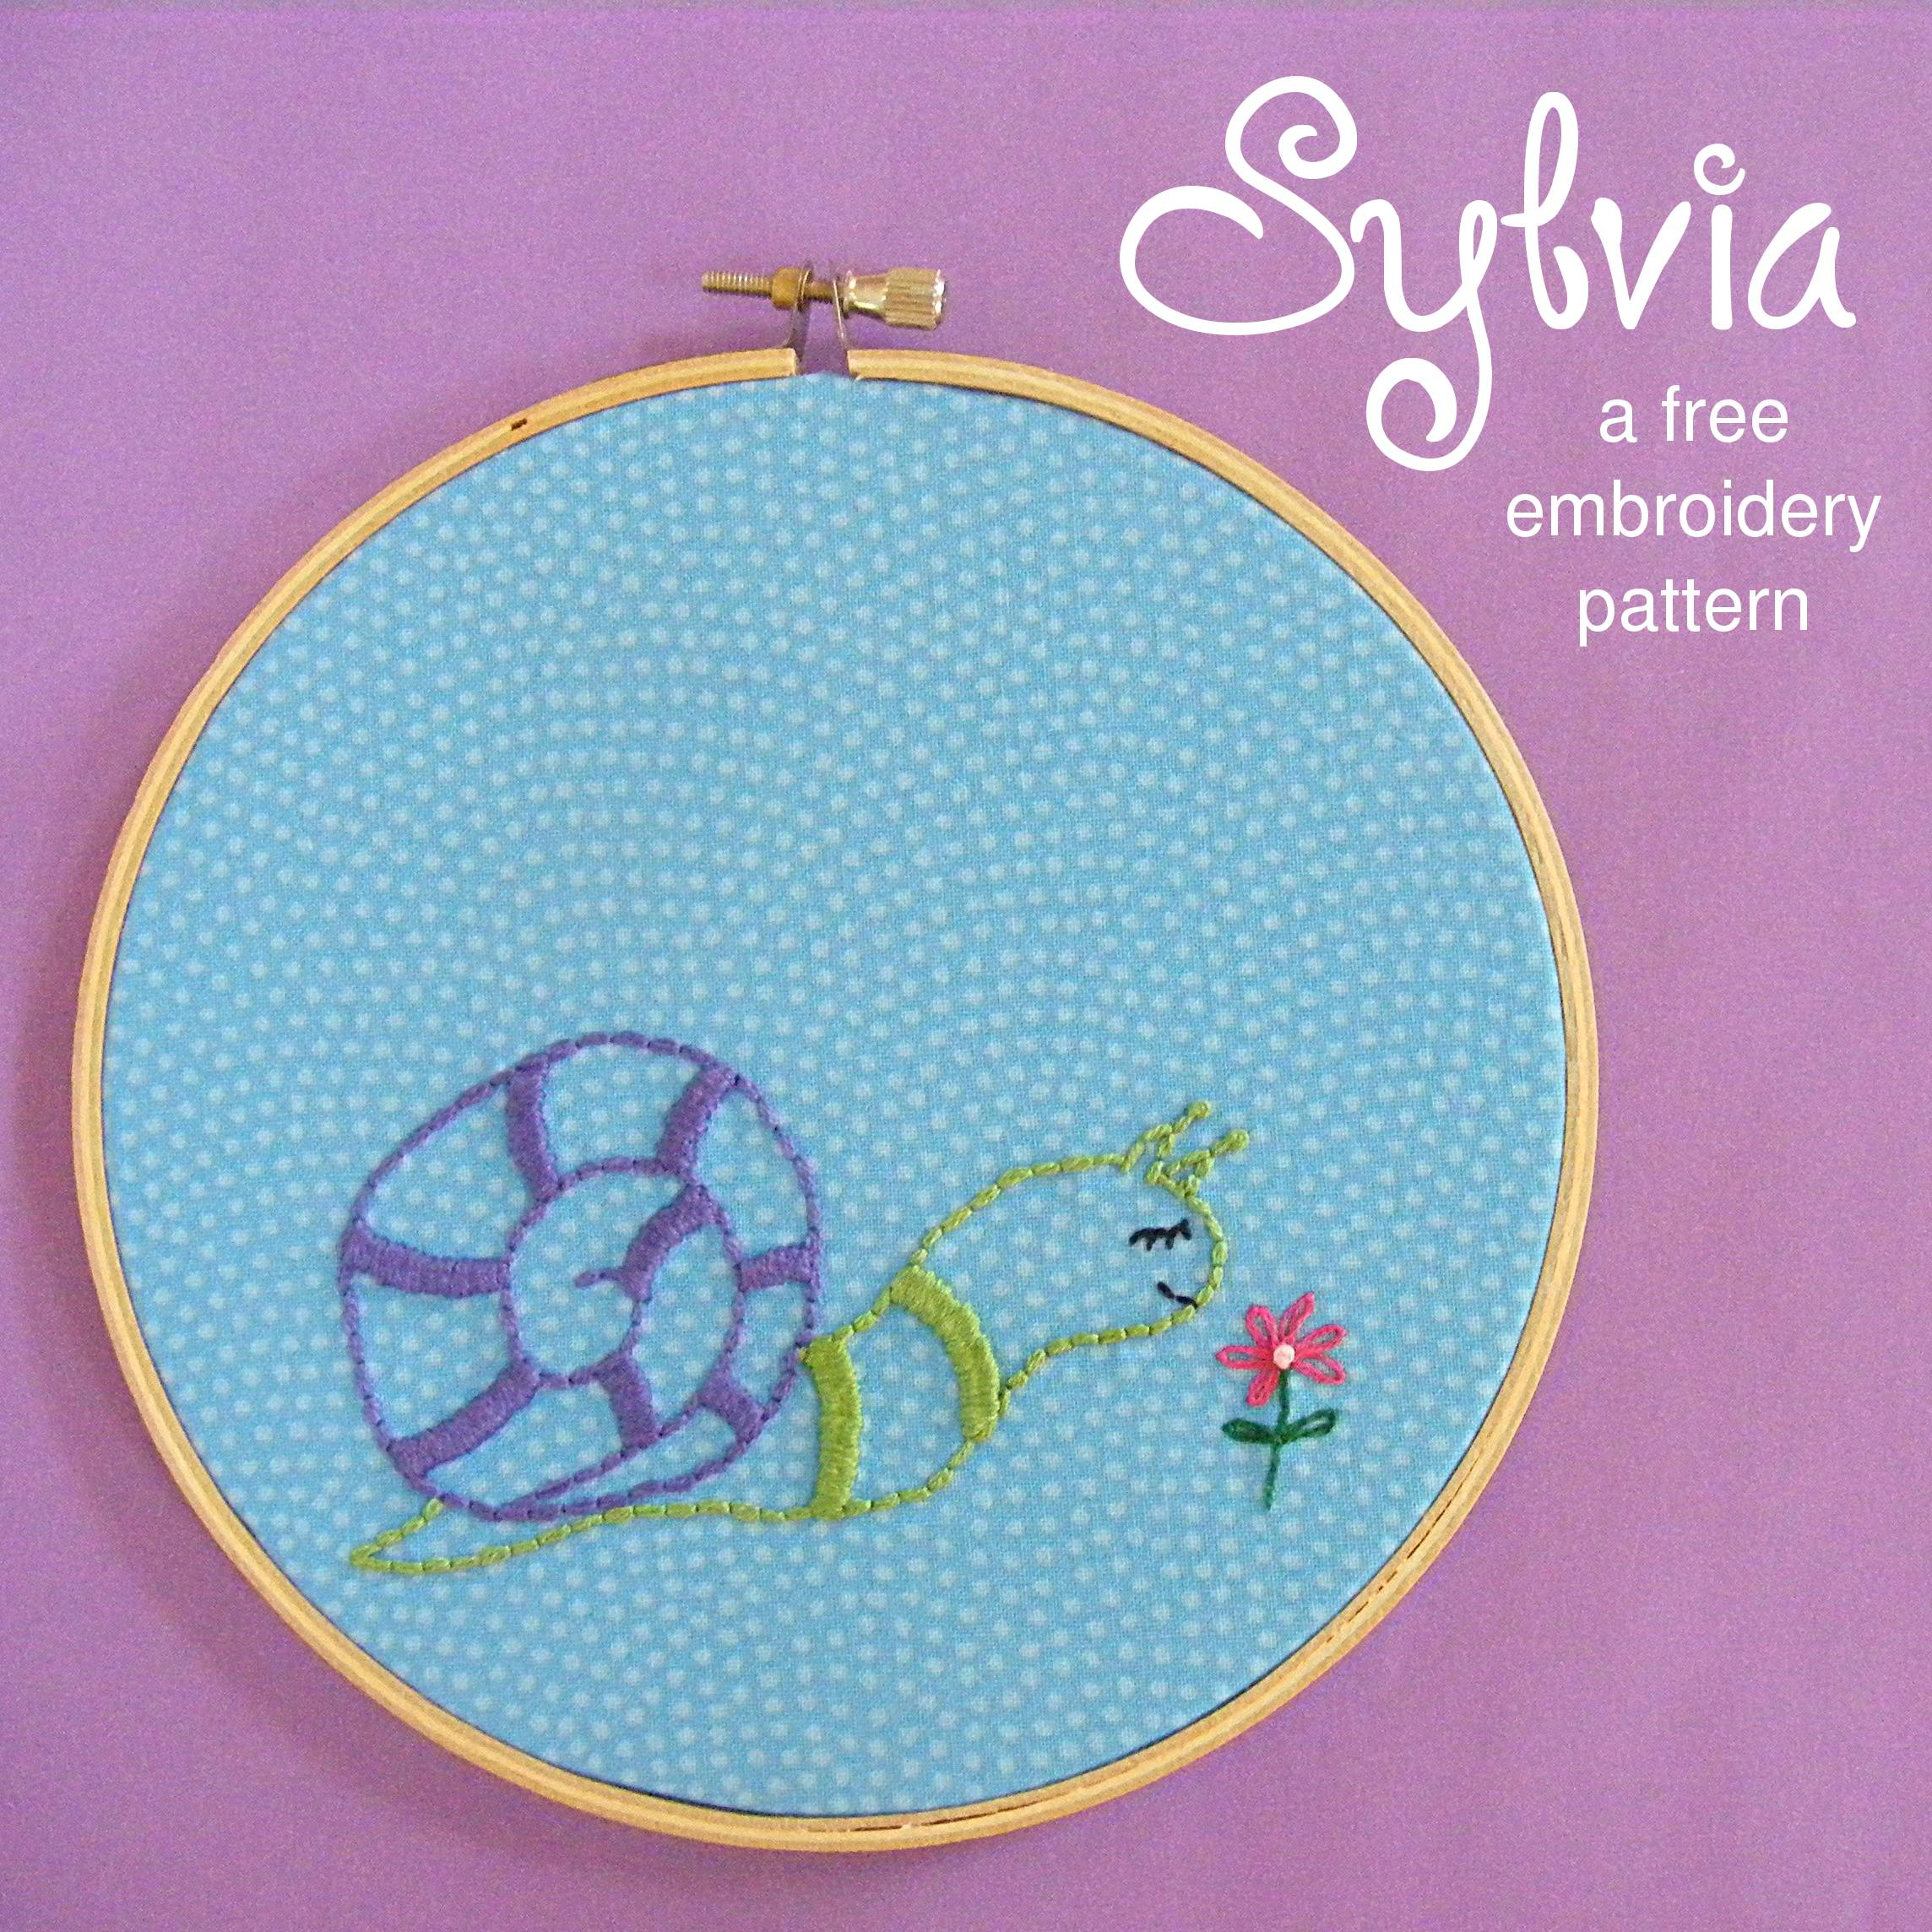 Free Embroidery Pattern Sweet Sylvia Snail A Free Embroidery Pattern Shiny Happy World